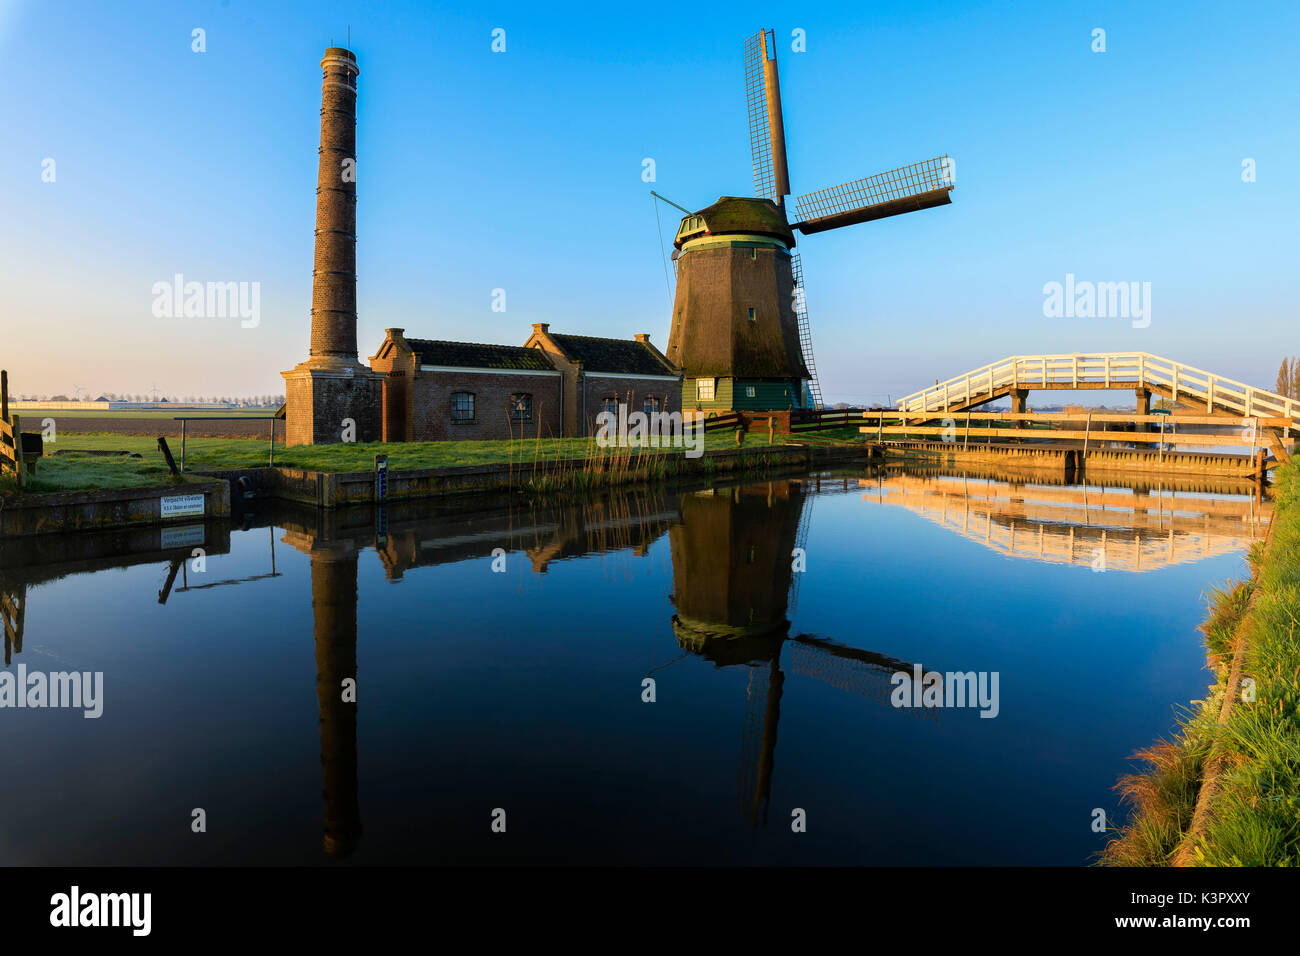 Typical windmill reflected in the canal at dawn Berkmeer municipality of Koggenland North Holland The Netherlands Europe Stock Photo